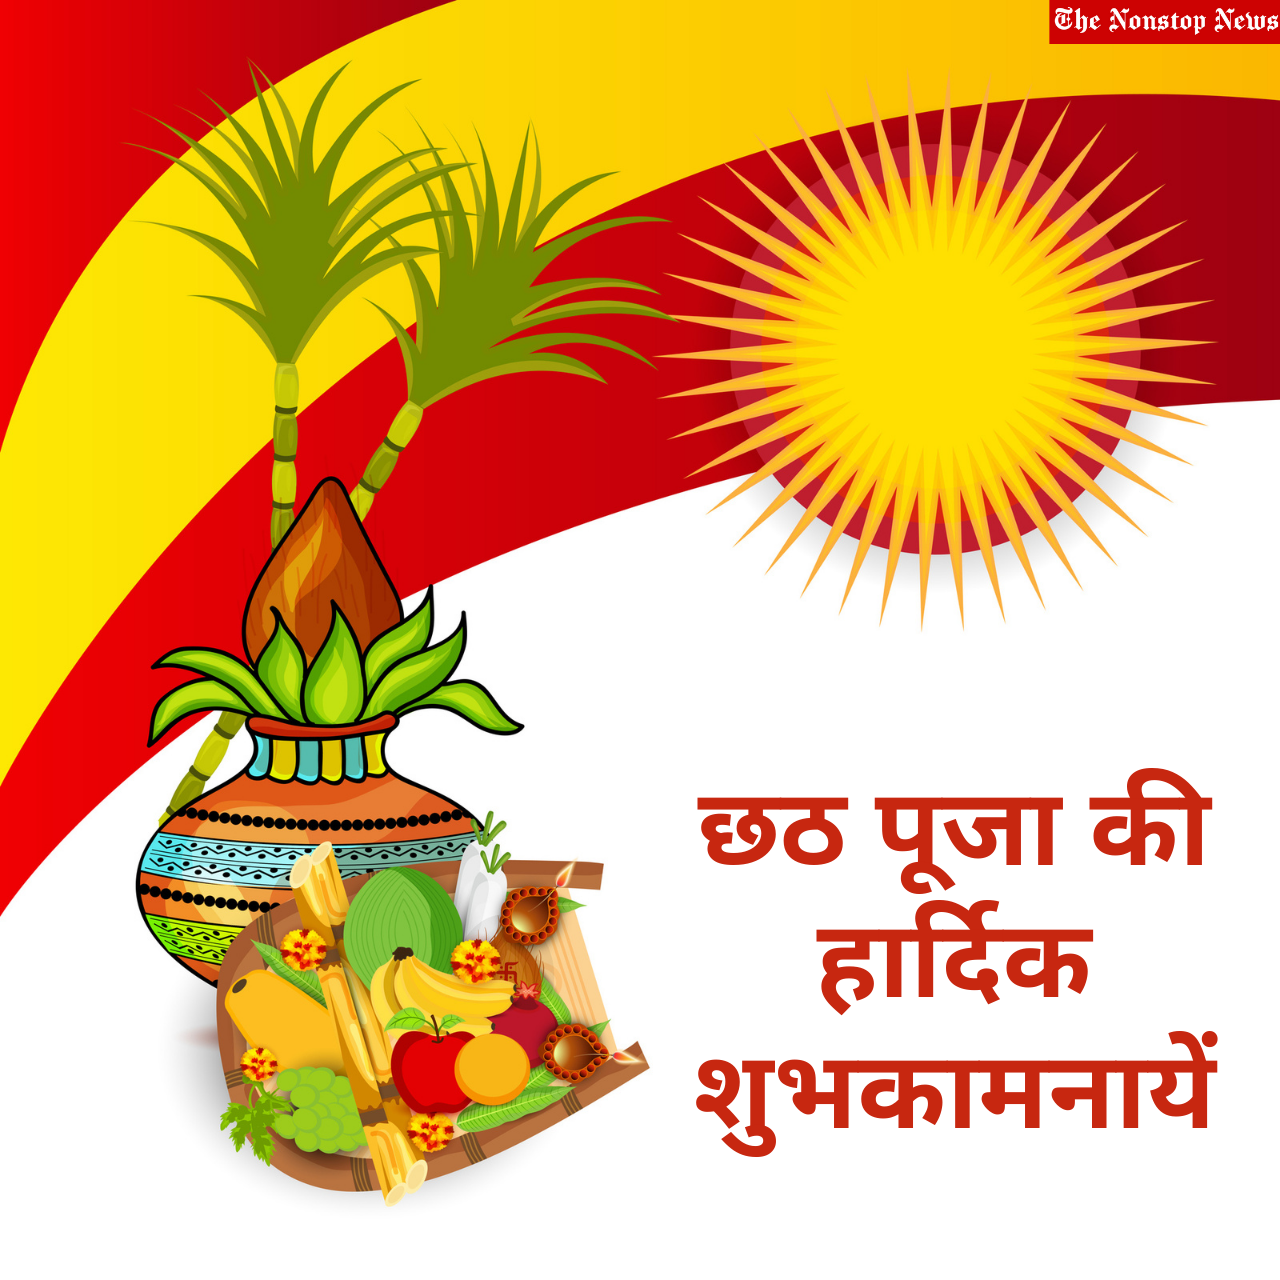 Chhath Puja 2021 Hindi Wishes, Greetings, Shayari, HD Images, Quotes, and Messages to Share